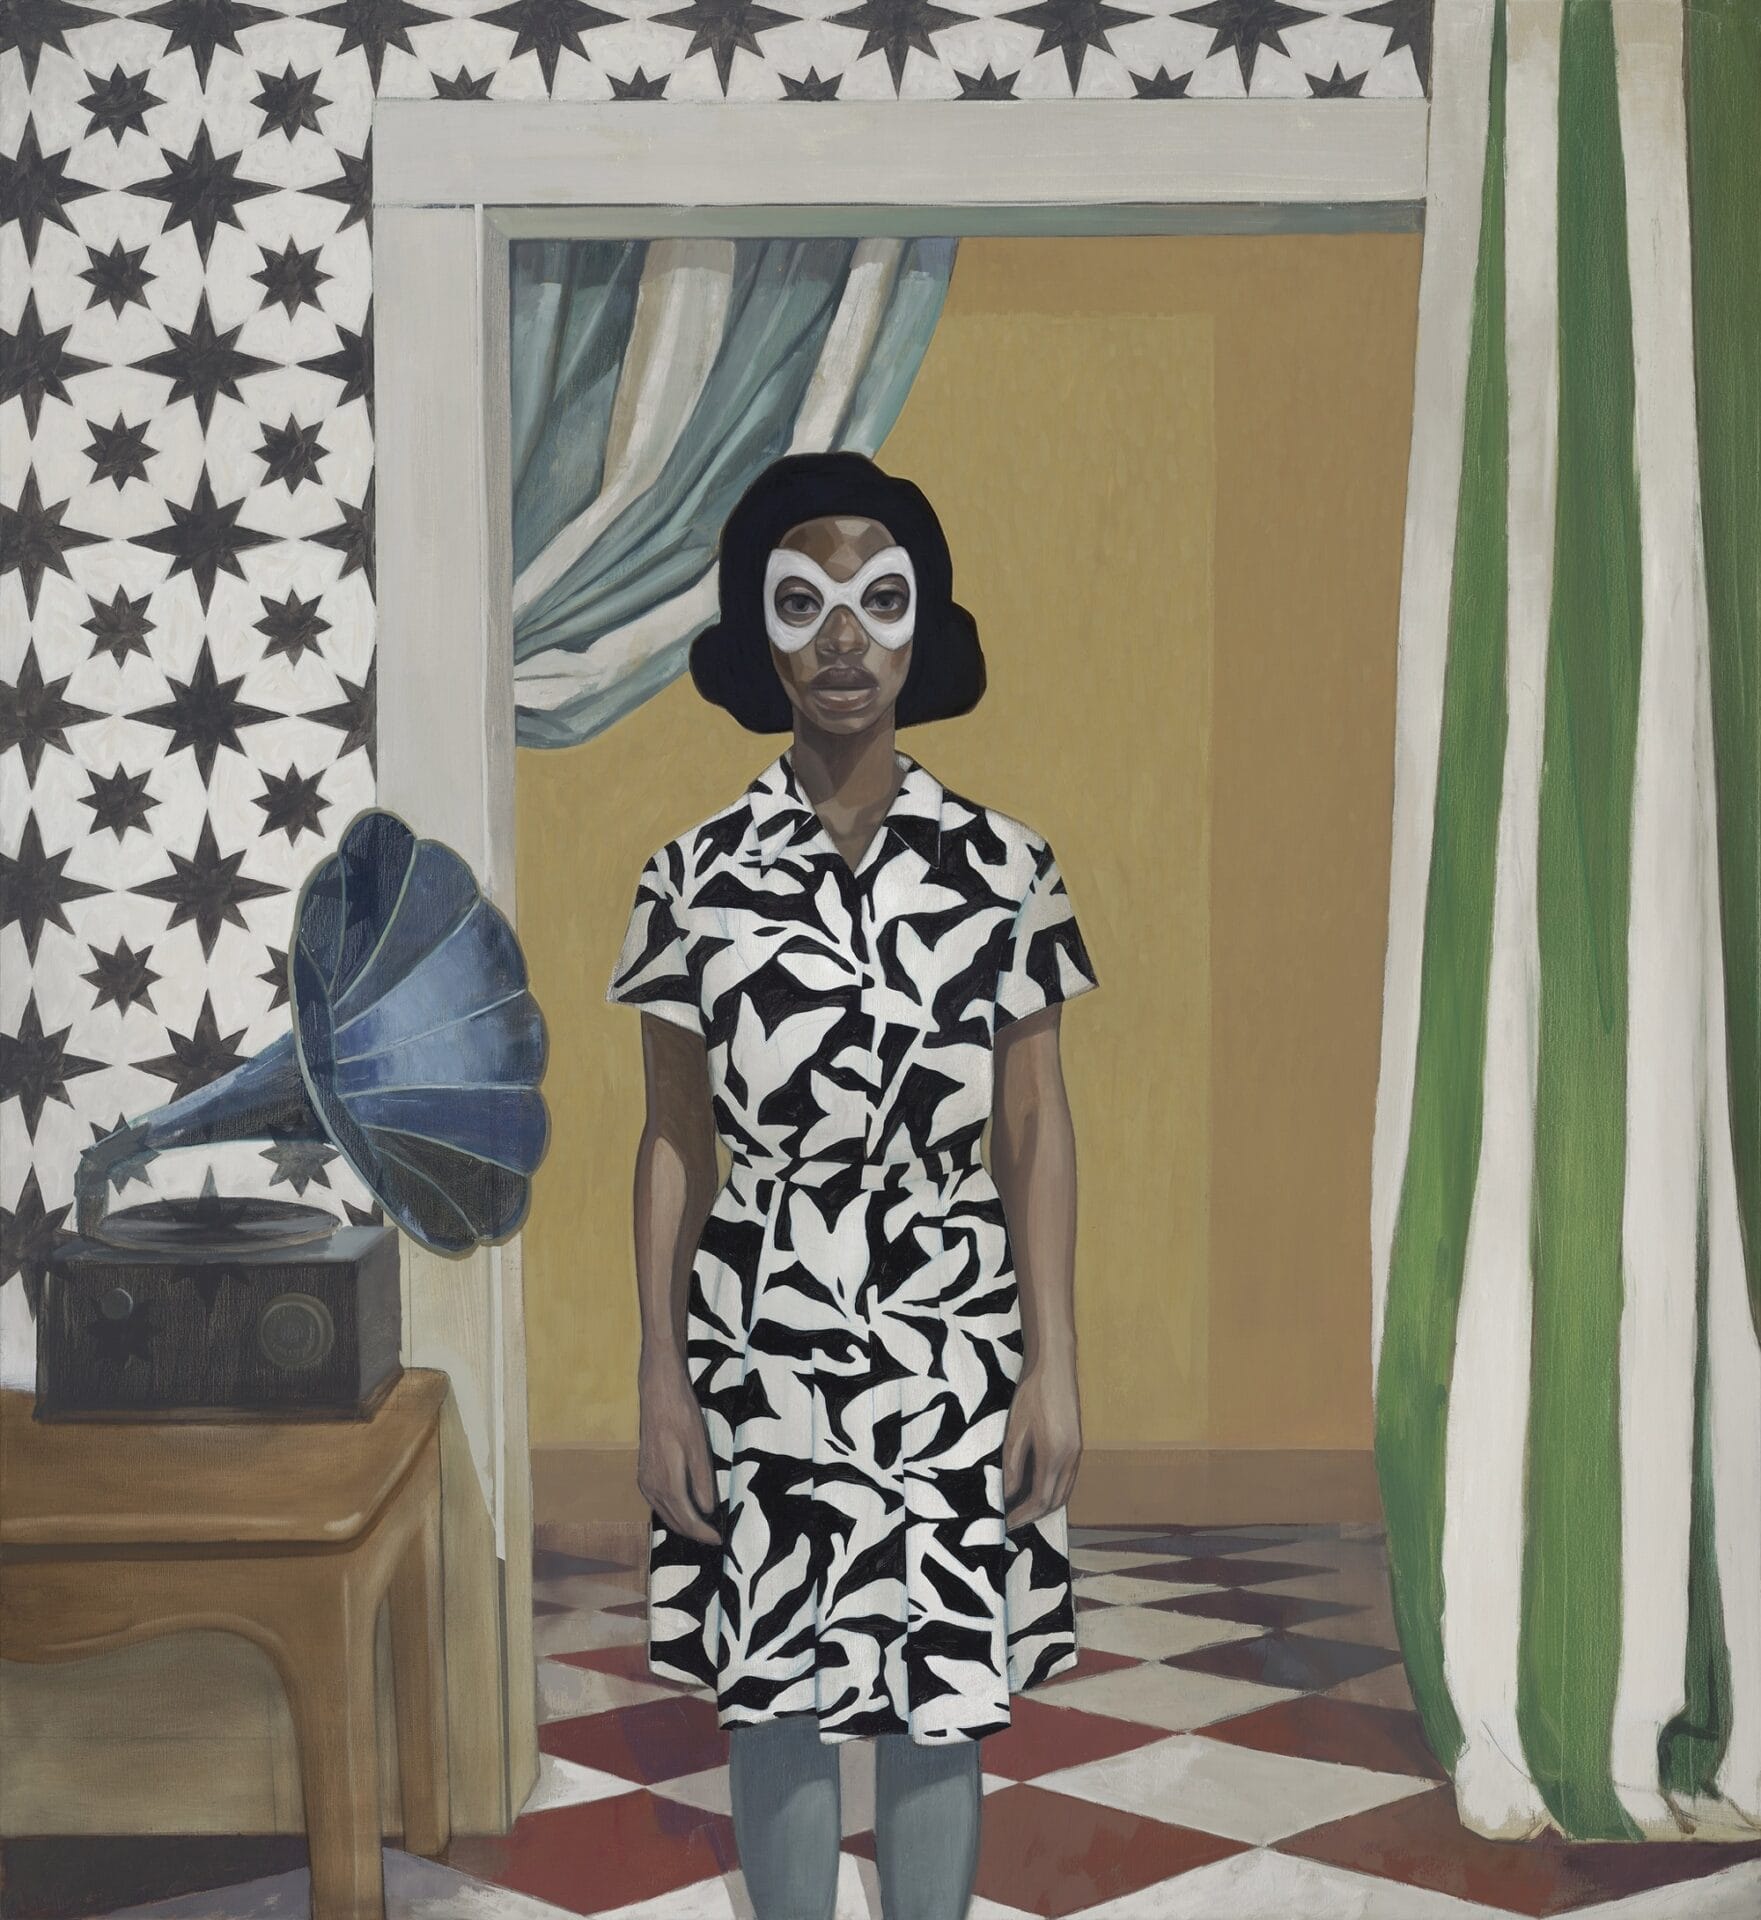 an oil painting of an imagined young black woman wearing a black and white dress and an eye mask, standing in a room with patterned wallpaper, a grammophone